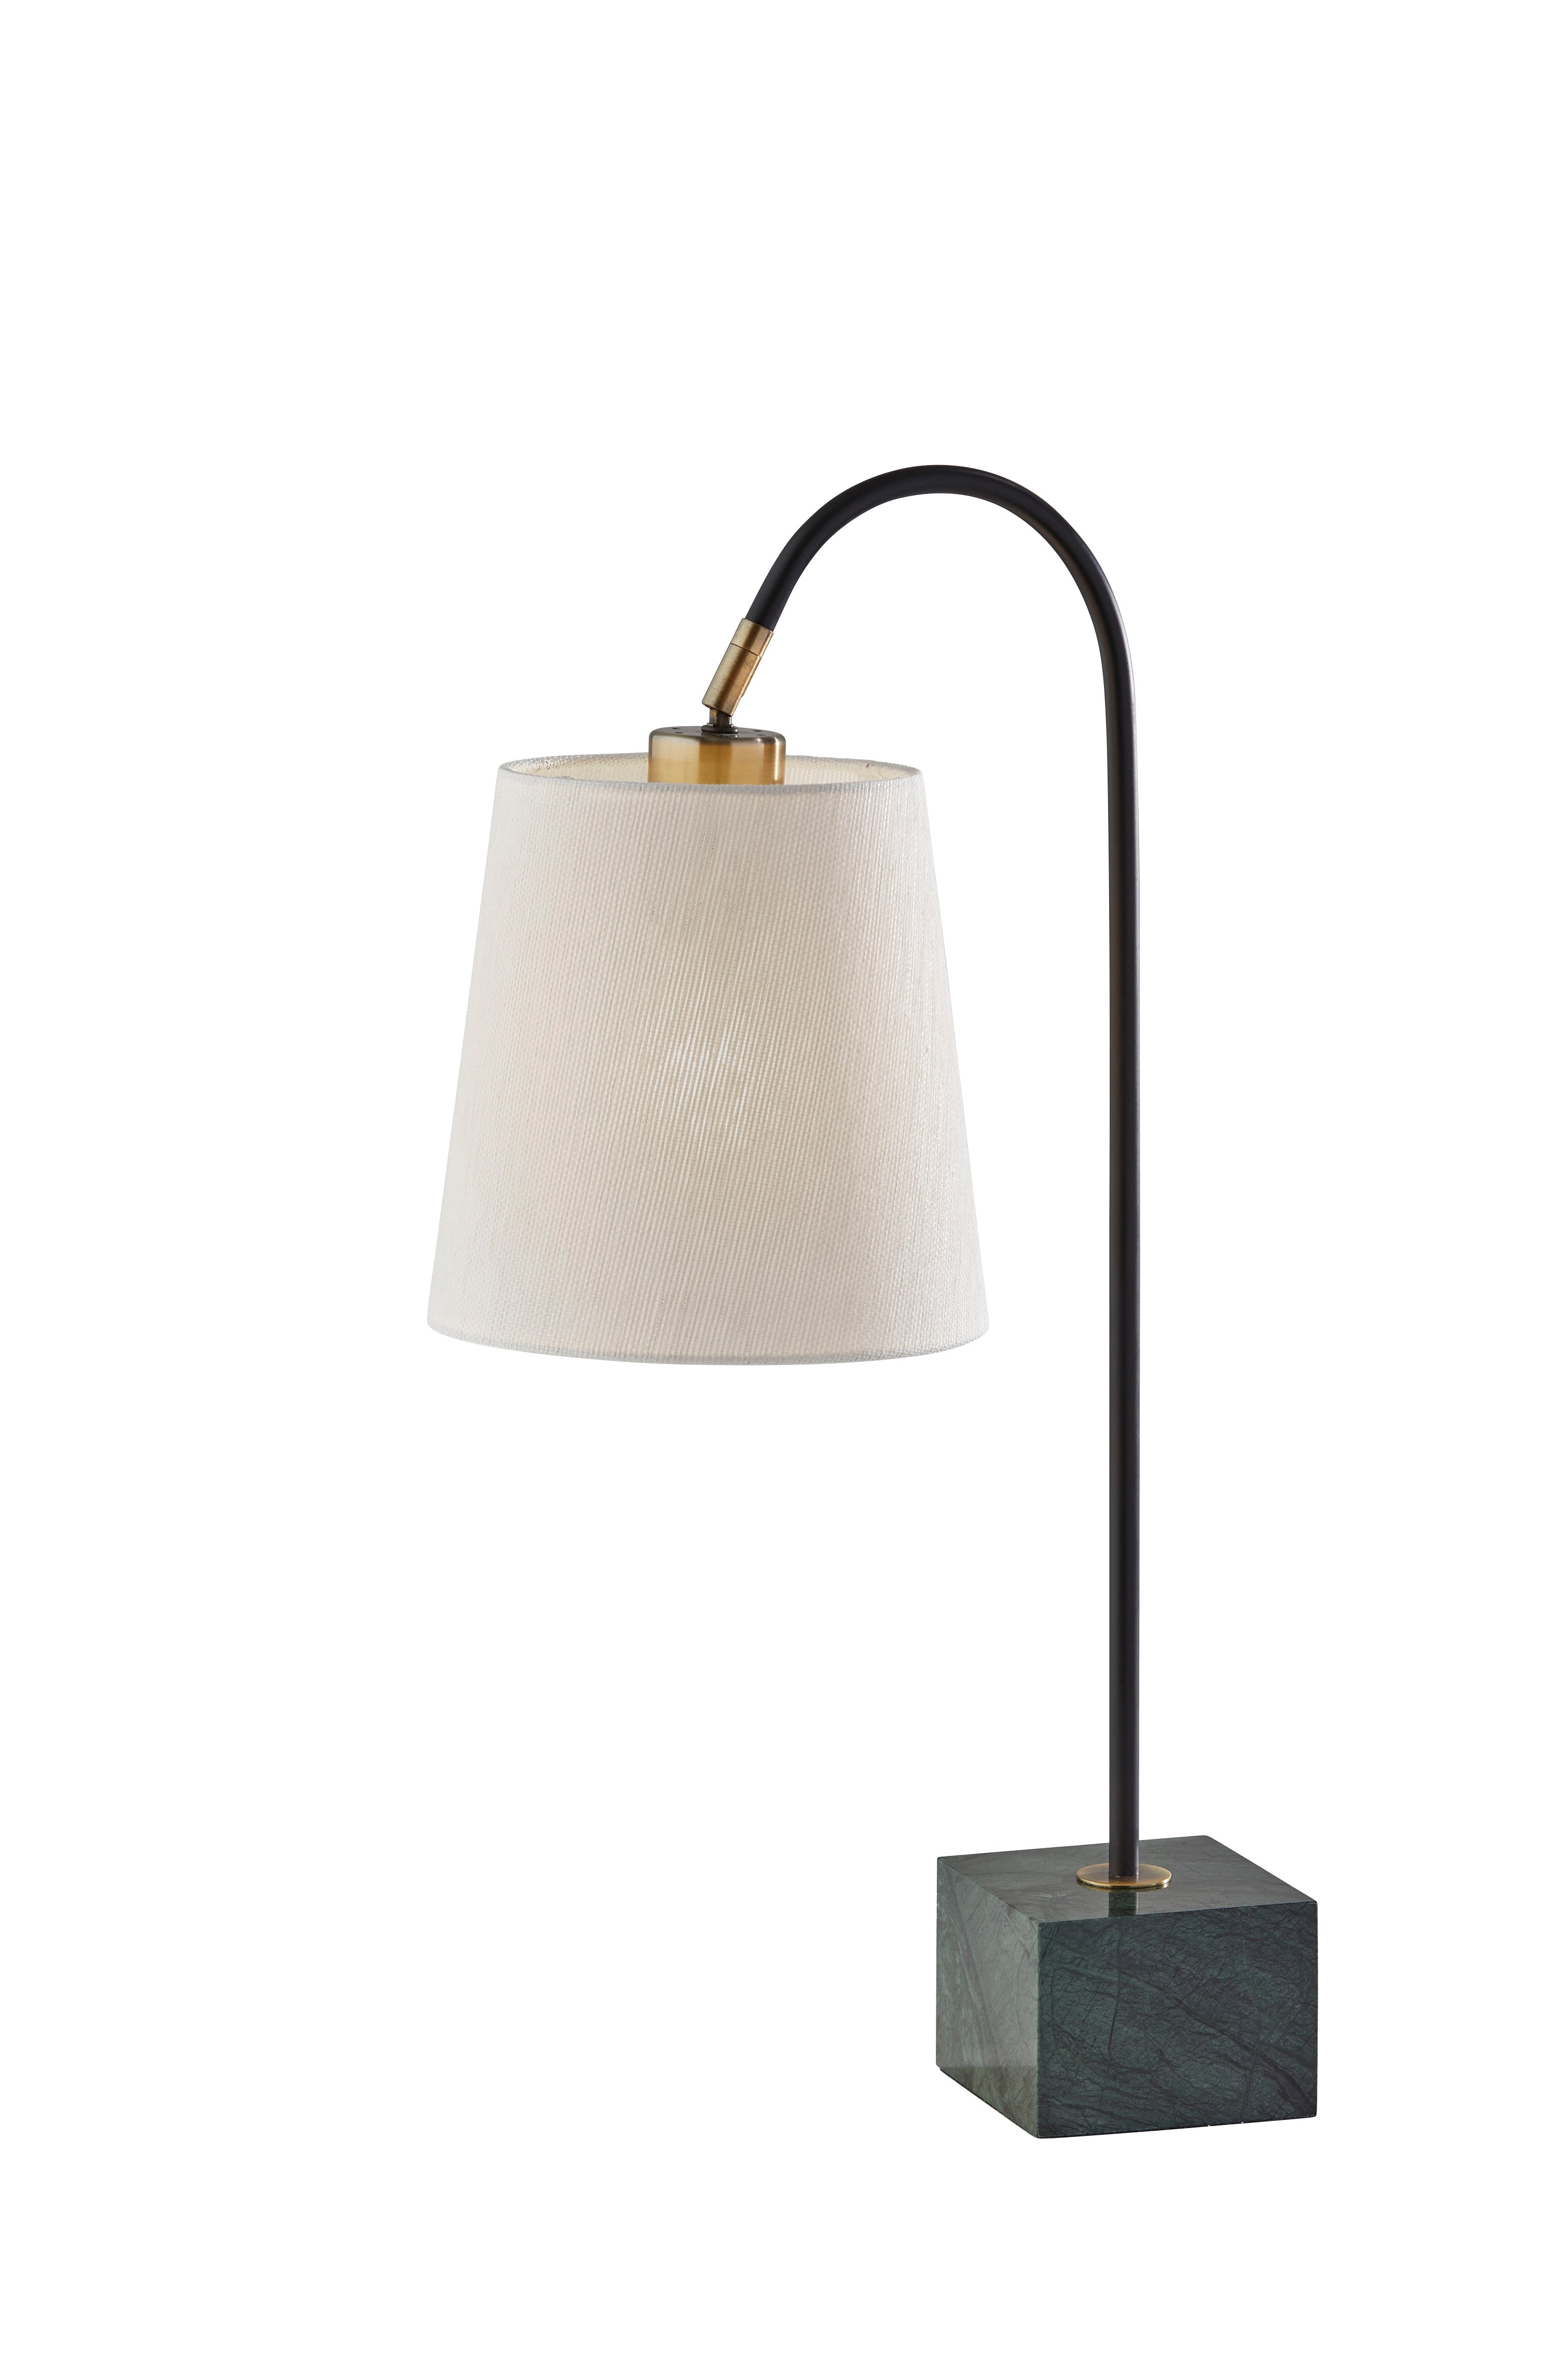 HANOVER Lampe sur table Noir, Or - 3398-01 | ADESSO